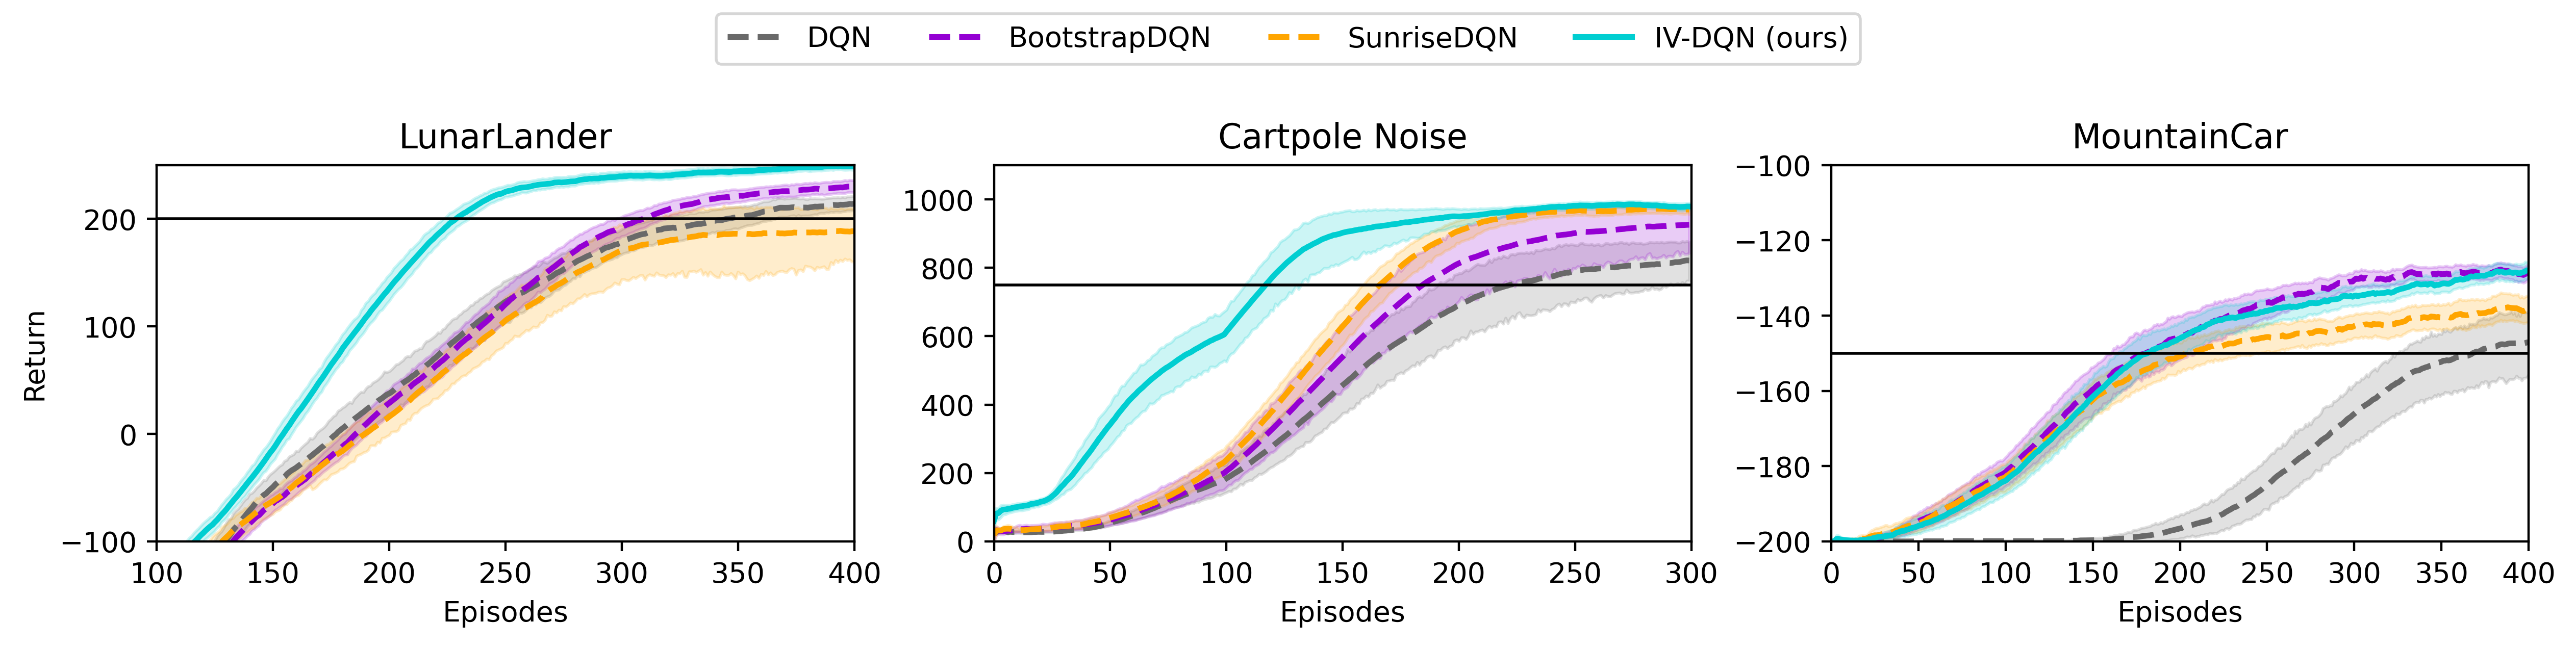 A plot showing learning curves, where IV-DQN is doing better than DQN and other ensemble baselines.